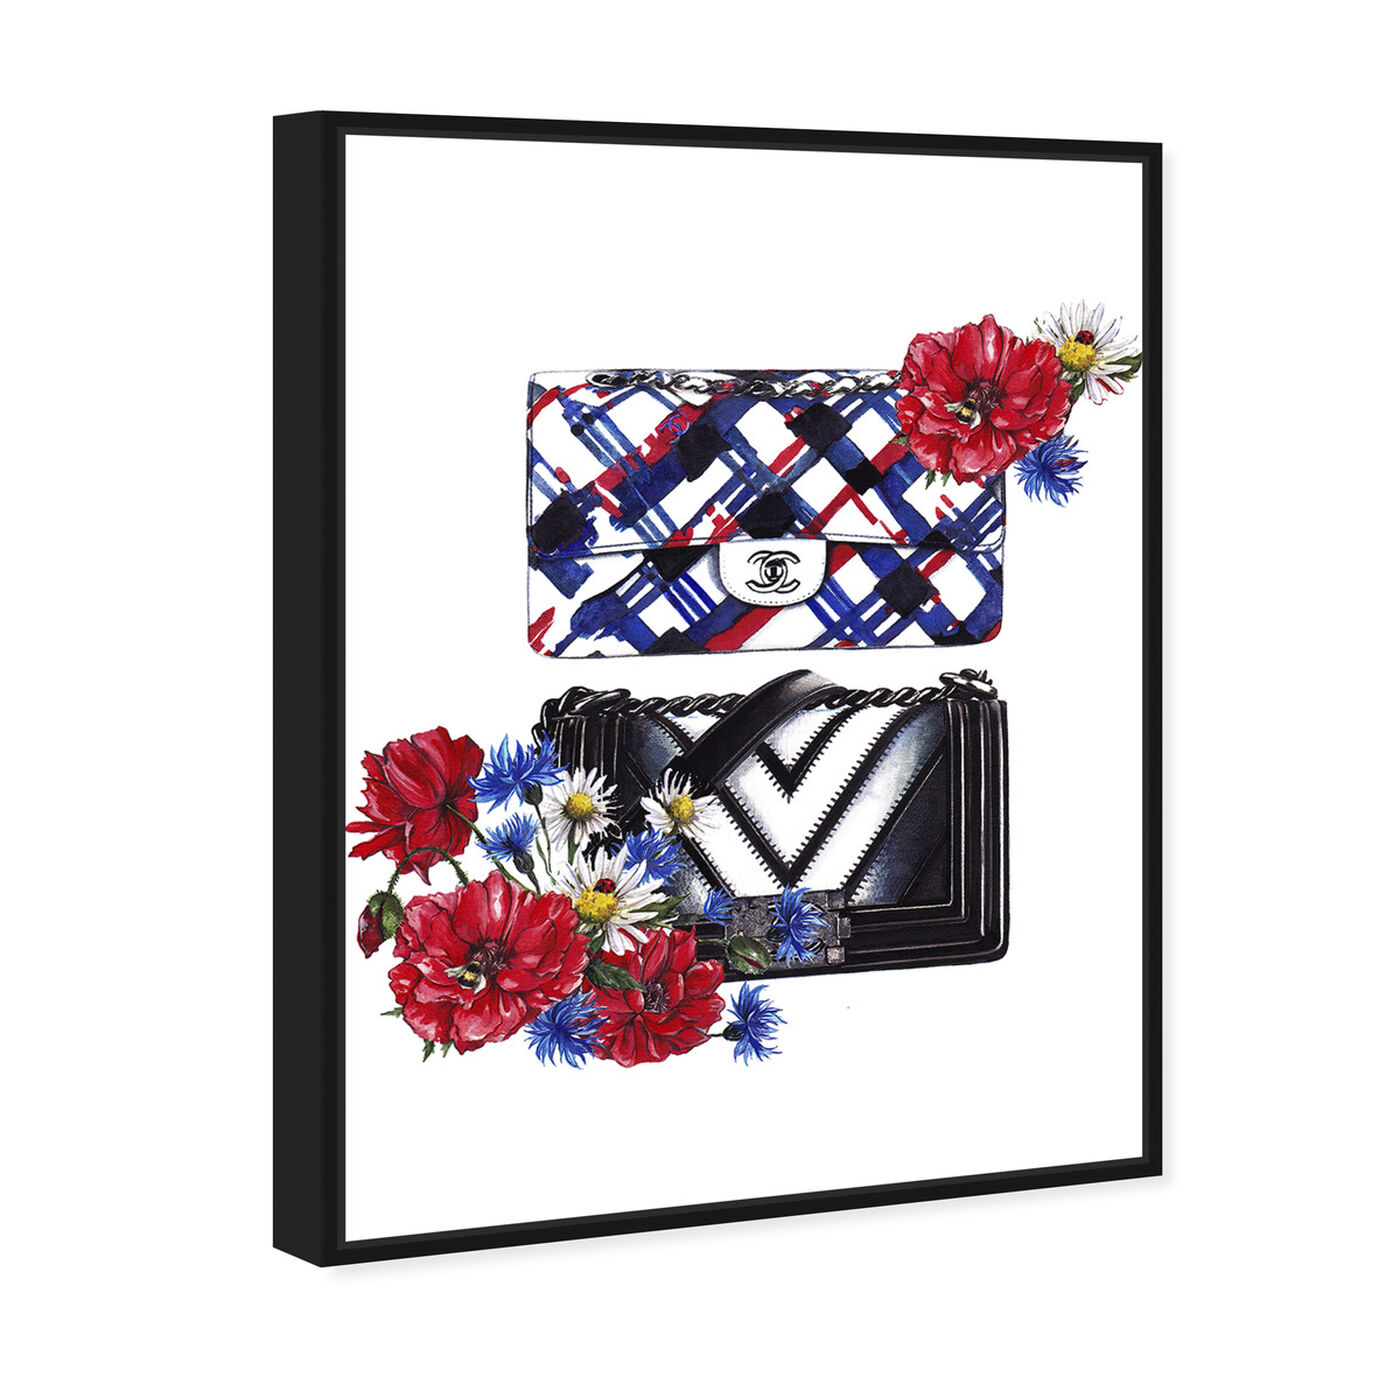 Angled view of Doll Memories - Bags Floral featuring fashion and glam and handbags art.